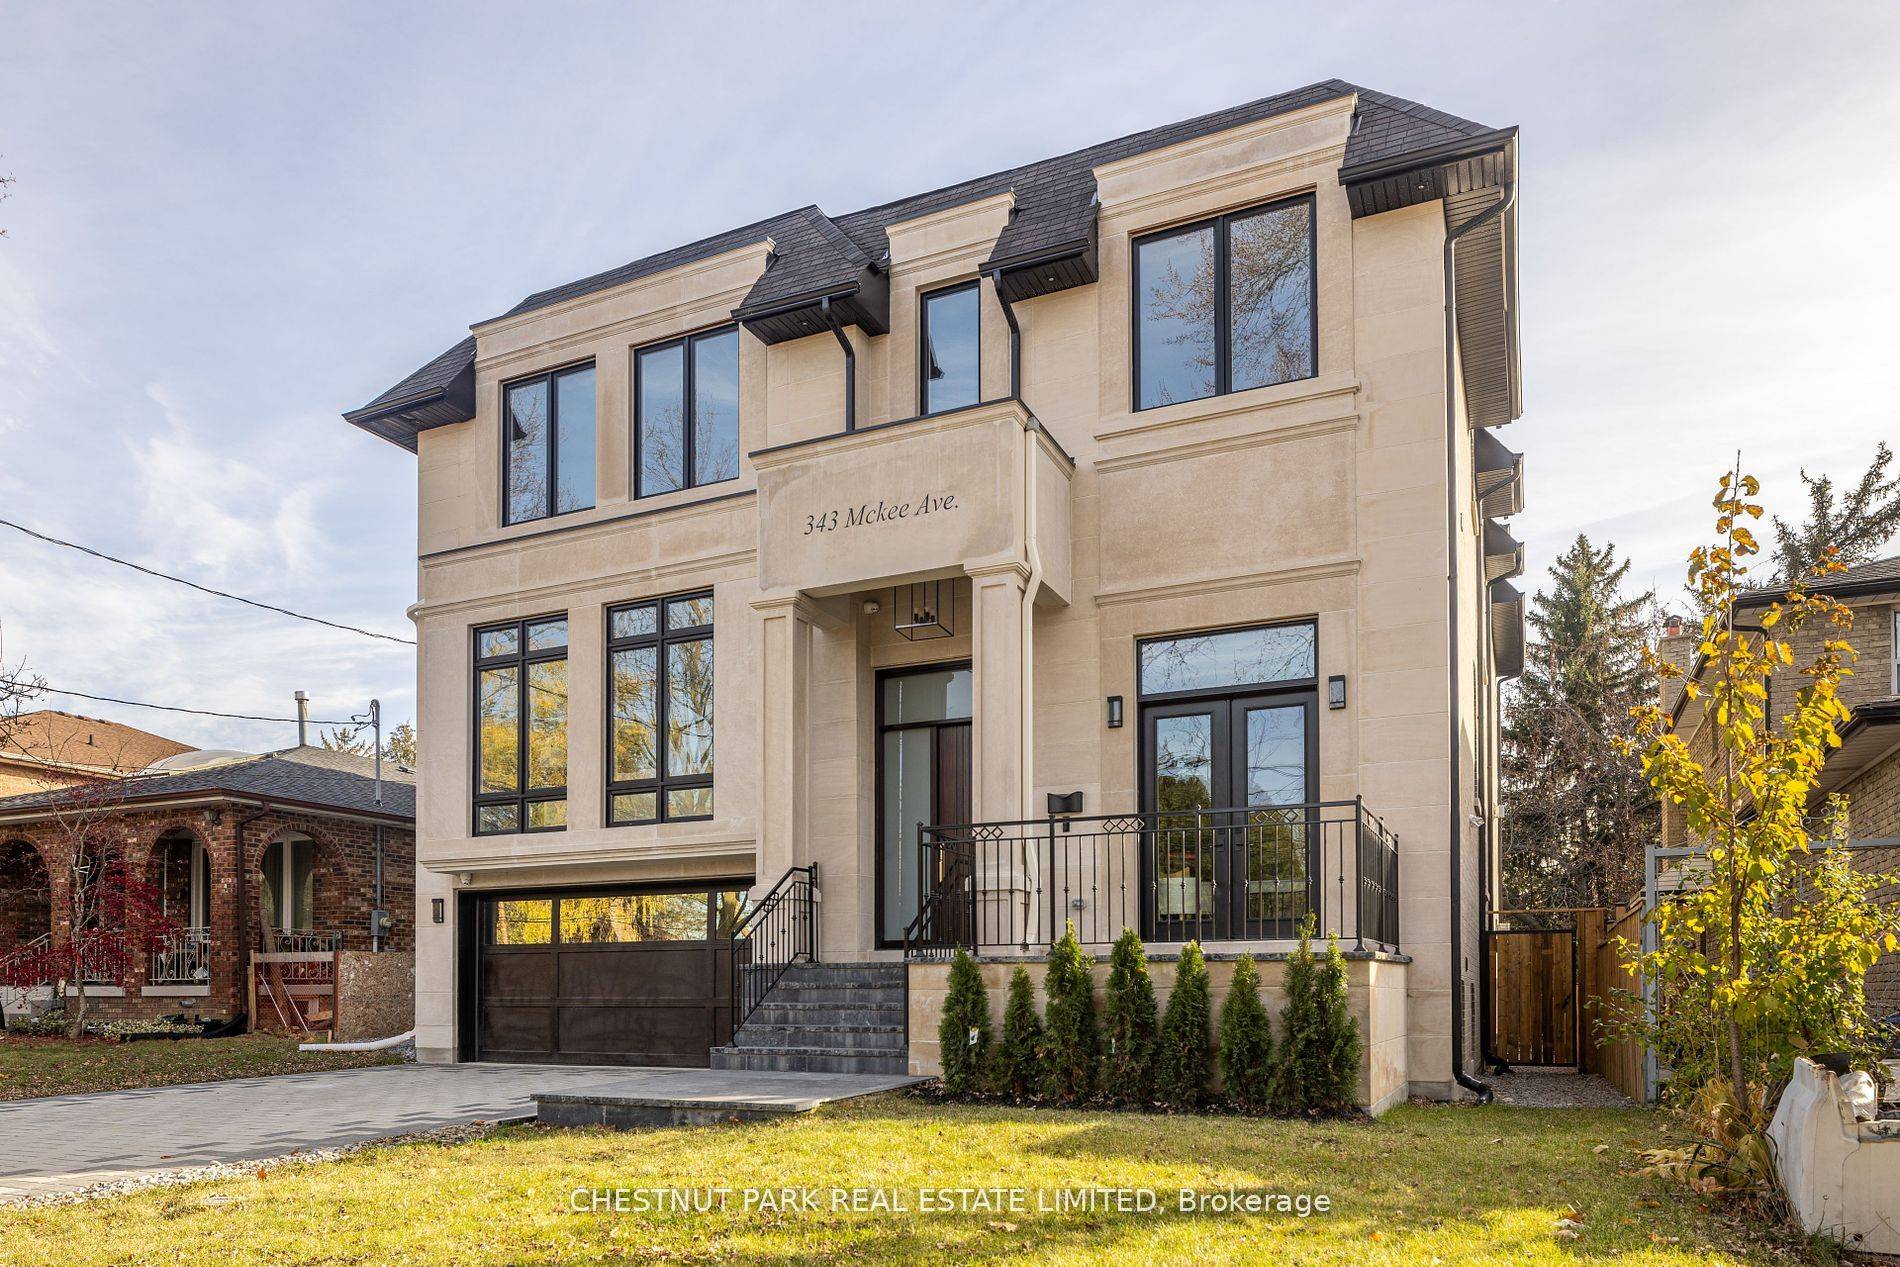 Show Stopper ! Over 7, 000 sq ft of Living Space sitting on 50x173 ft lot, This is The Pinnacle of Luxury Home Willowdale Has to Offer.